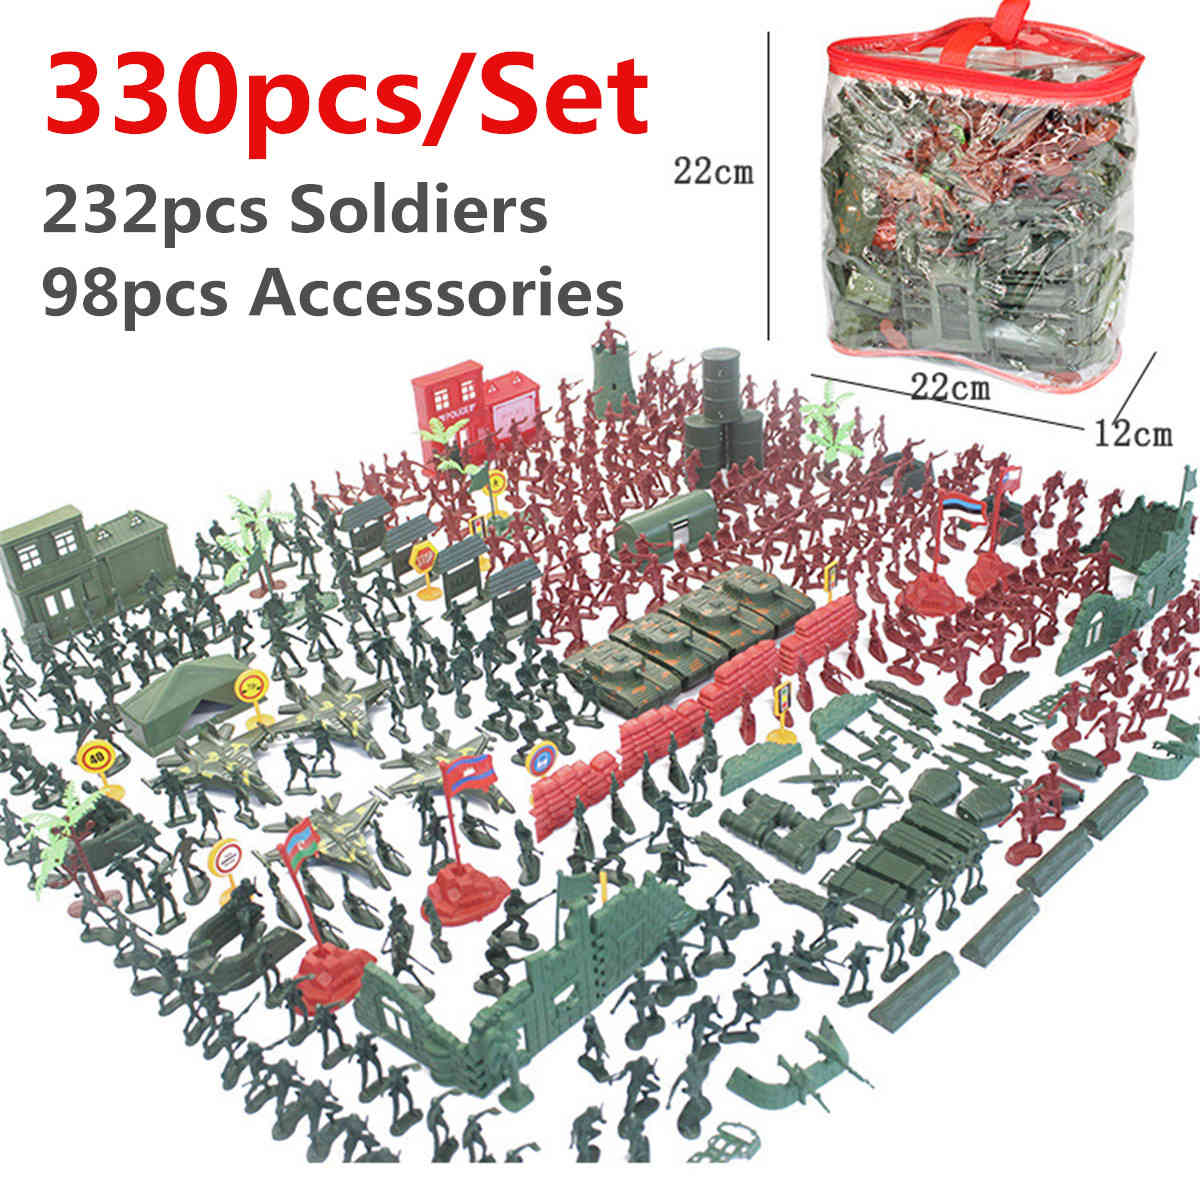 Kids 290pcs/330pcs Set Plastic Military Soldier Model Playset Toy Army Base Figures Accessories Decor Children Gift Toys от DHgate WW